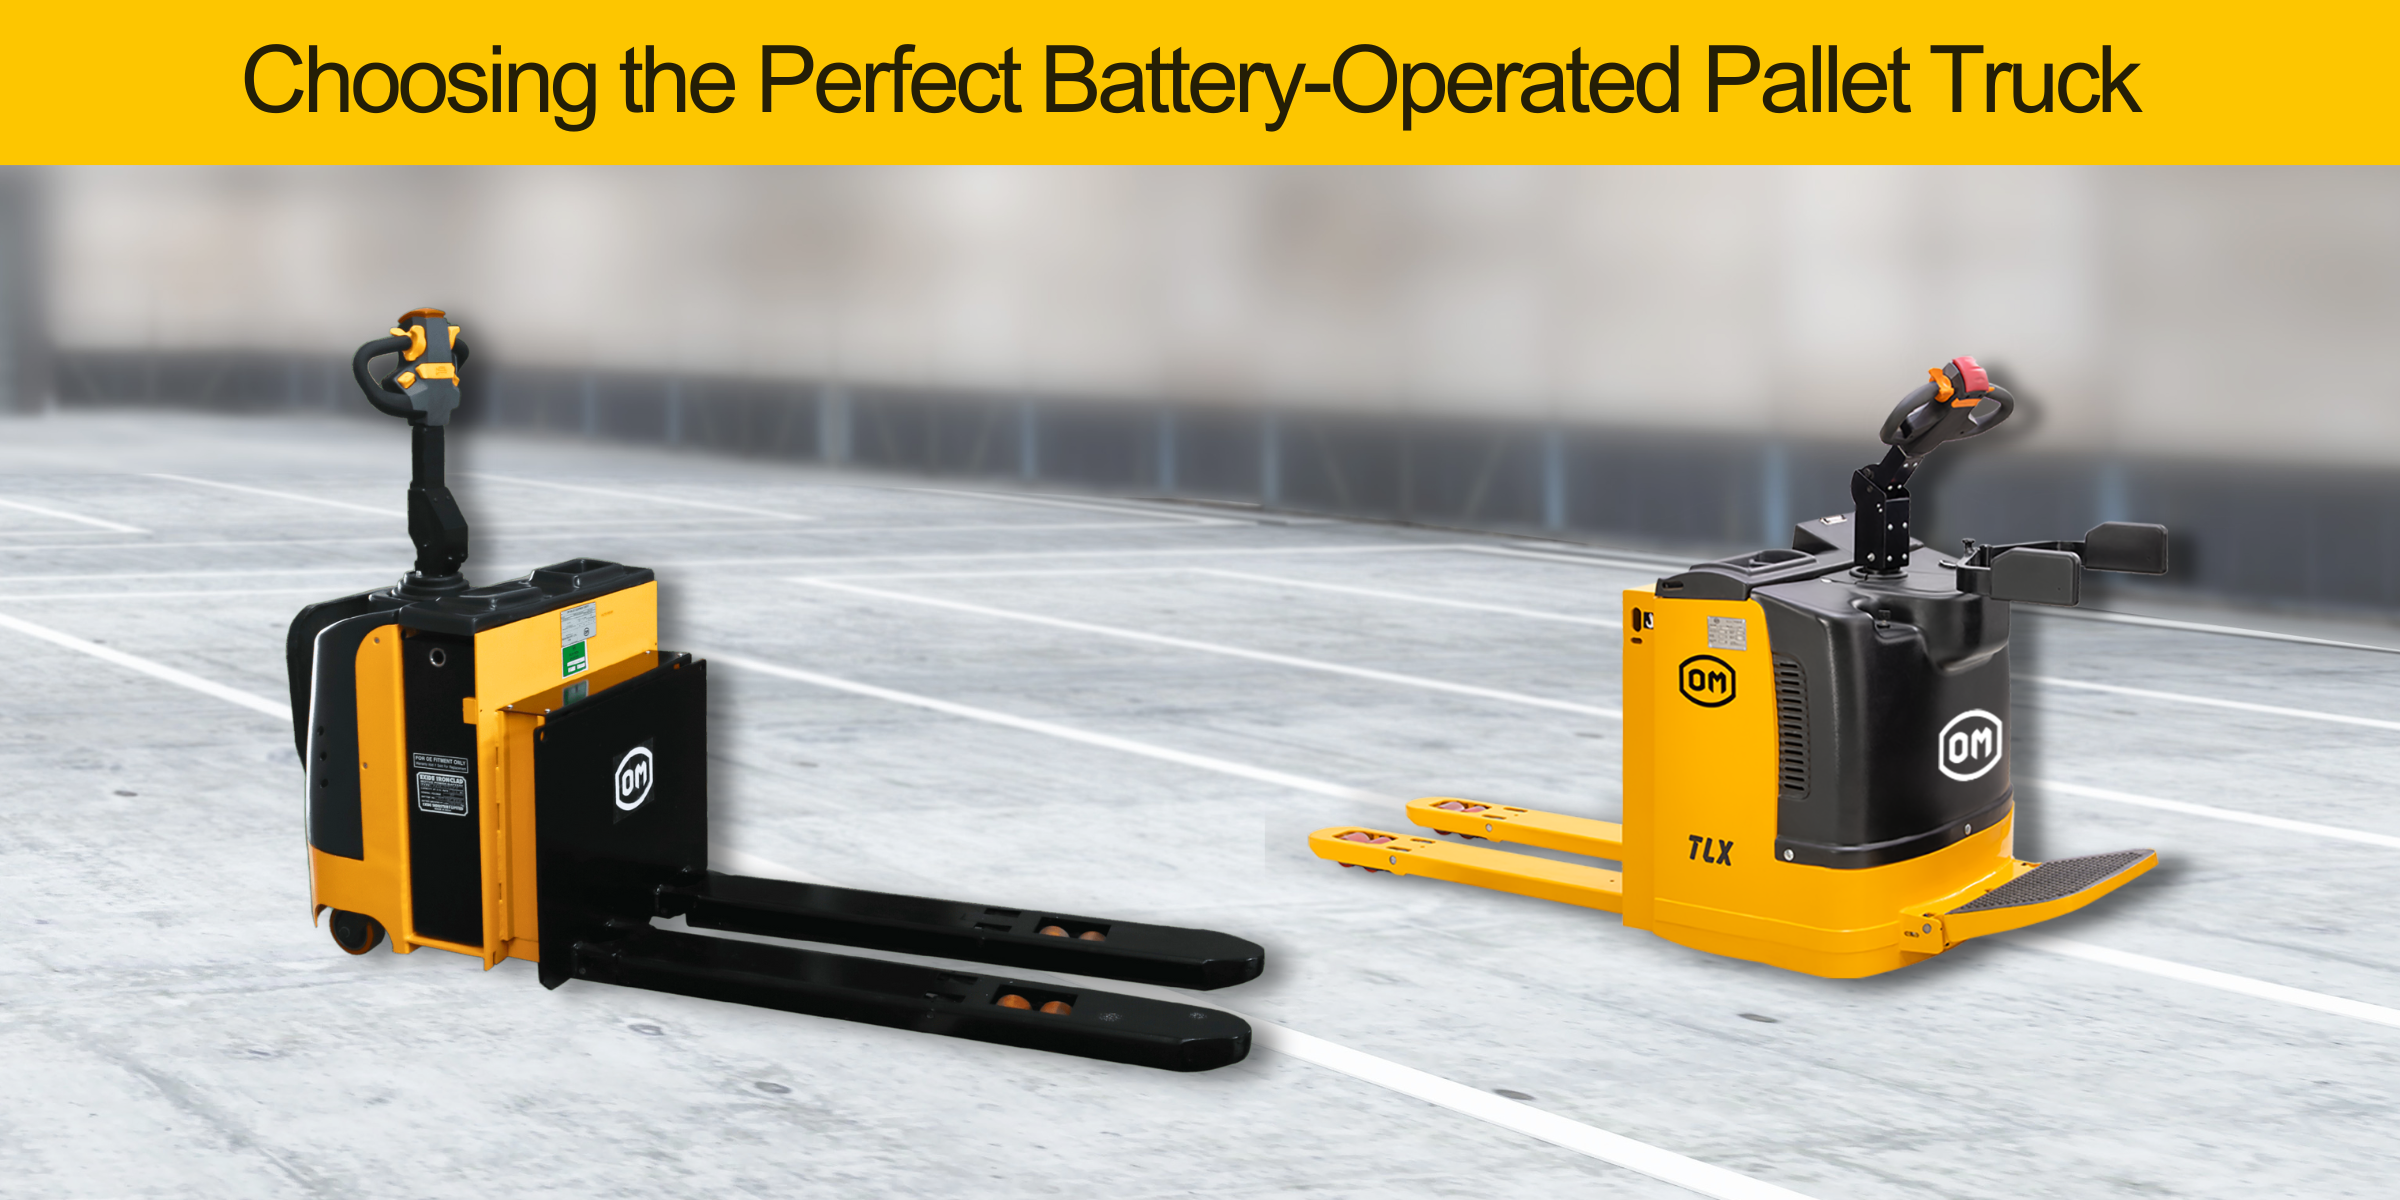 How to Choose the Right Battery-Operated Pallet Truck for Your Needs